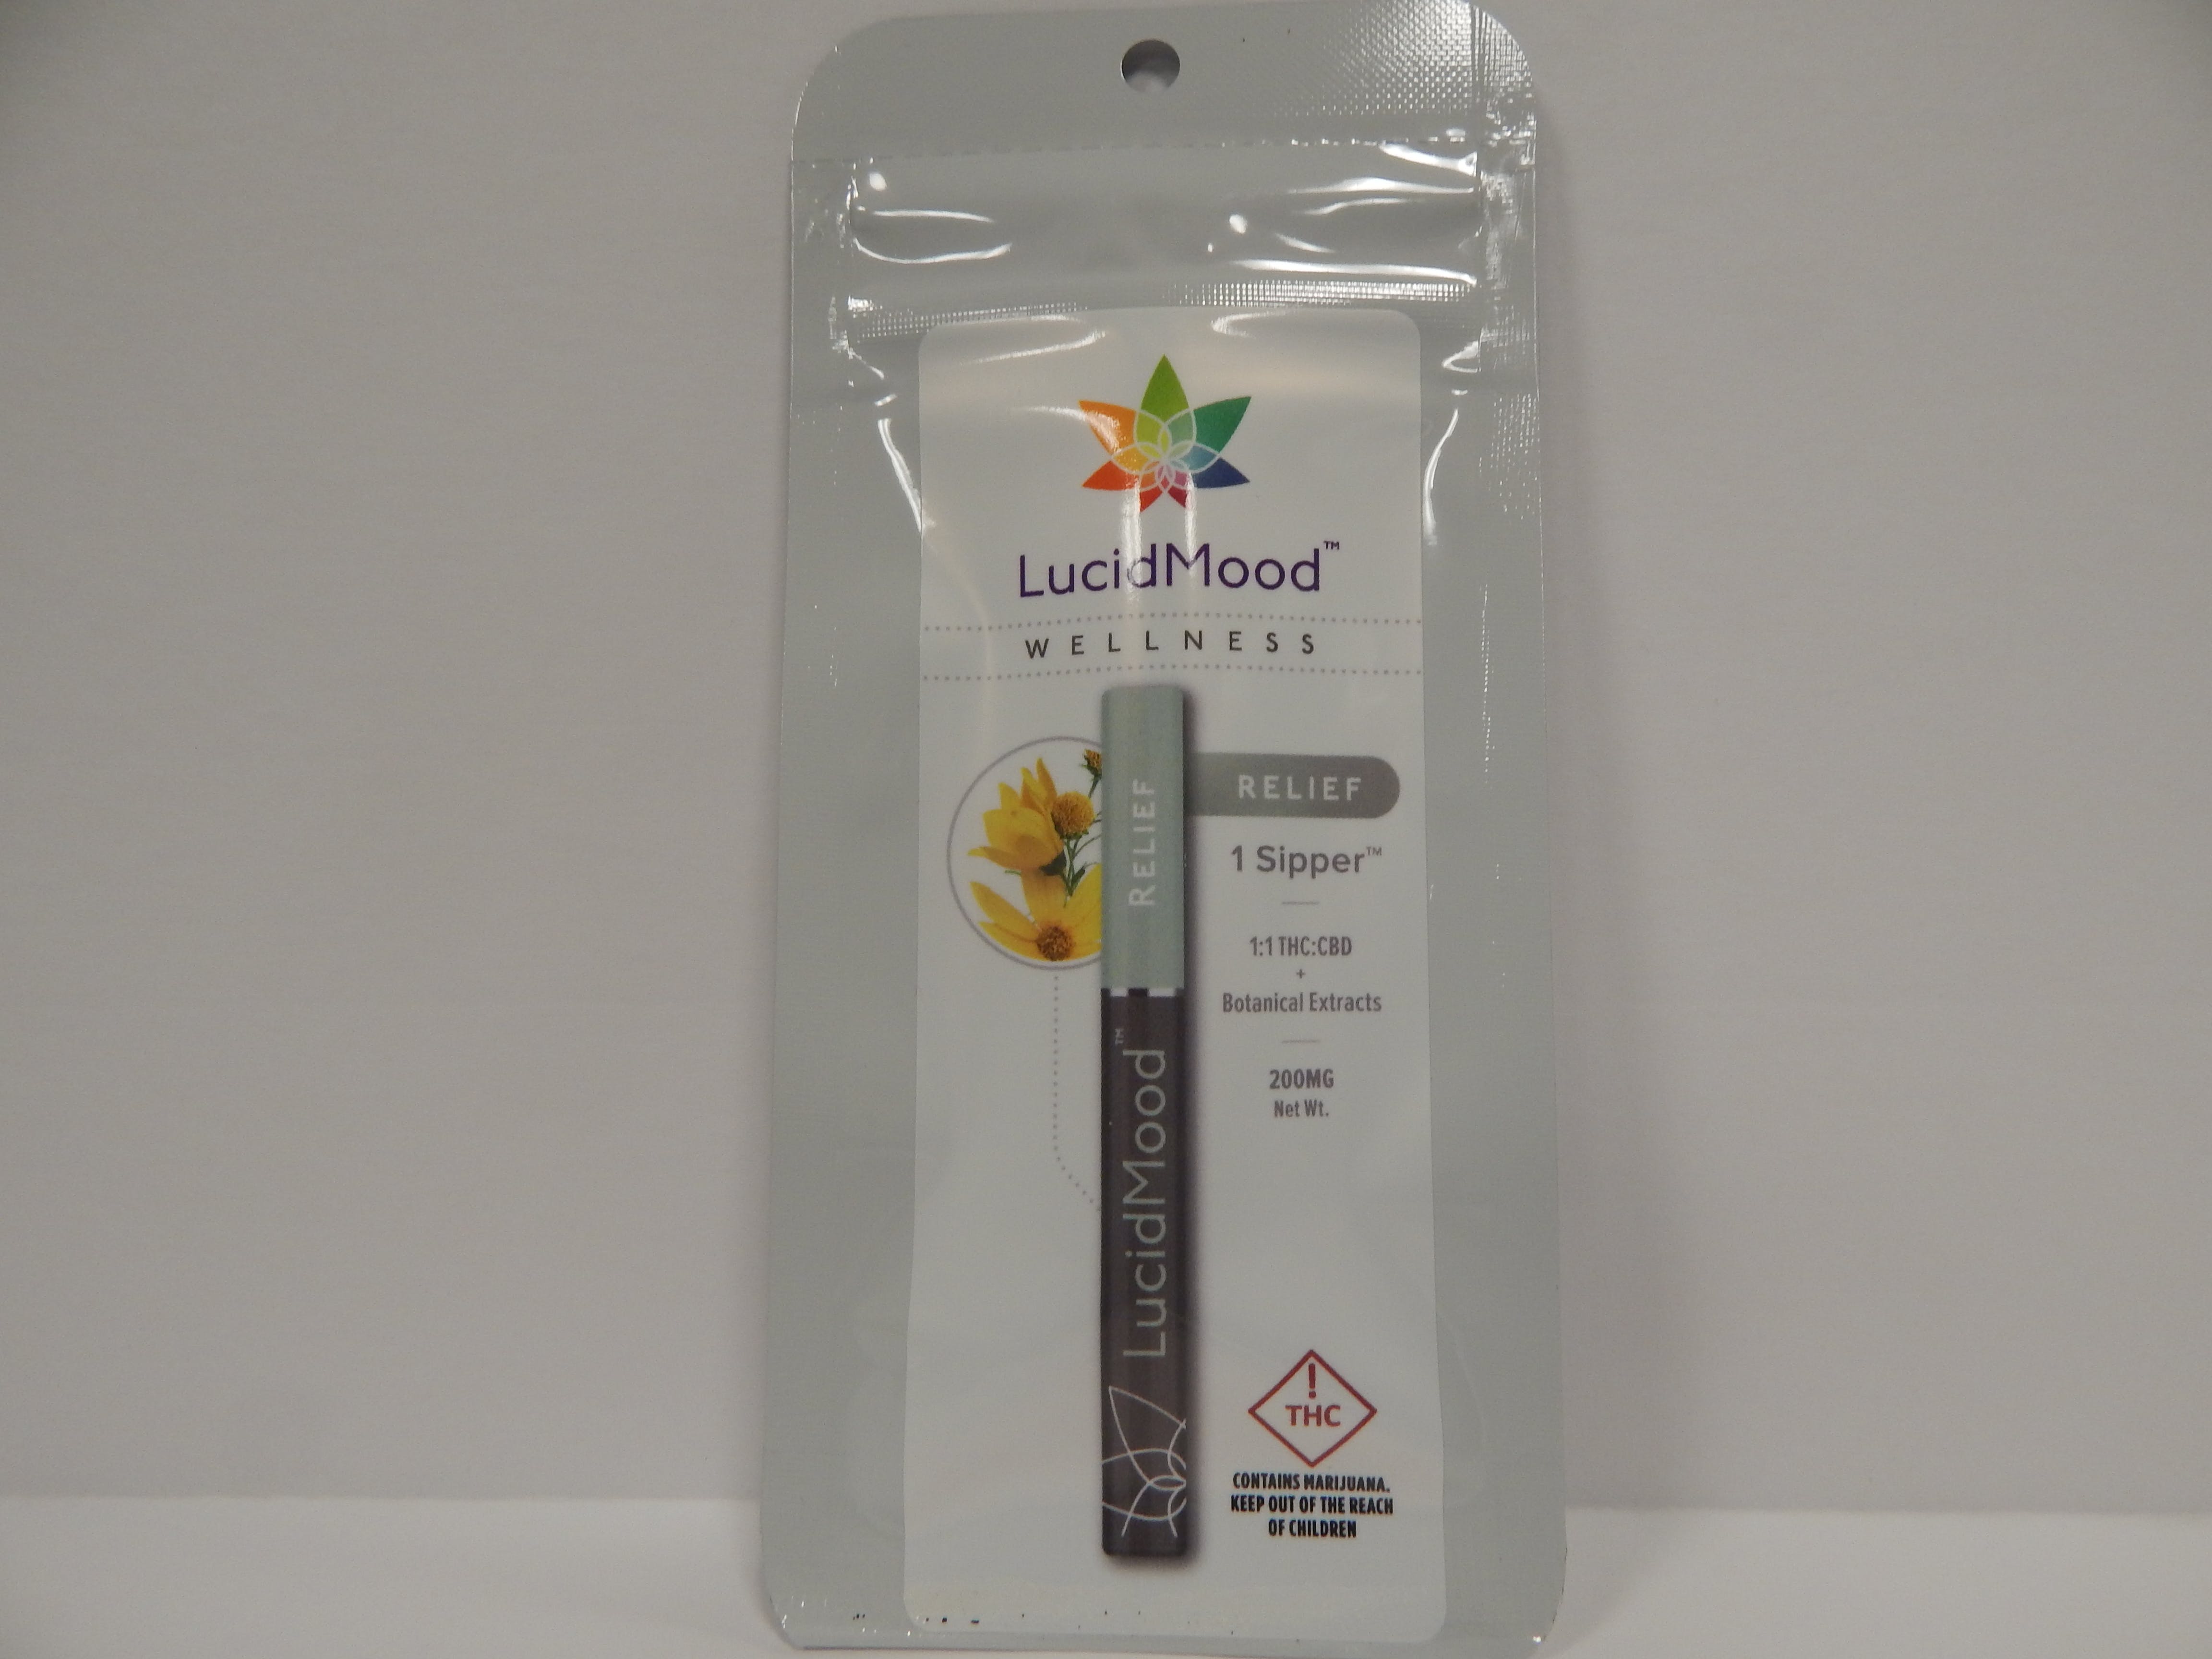 concentrate-lucidmood-11-200mg-relief-vape-pen